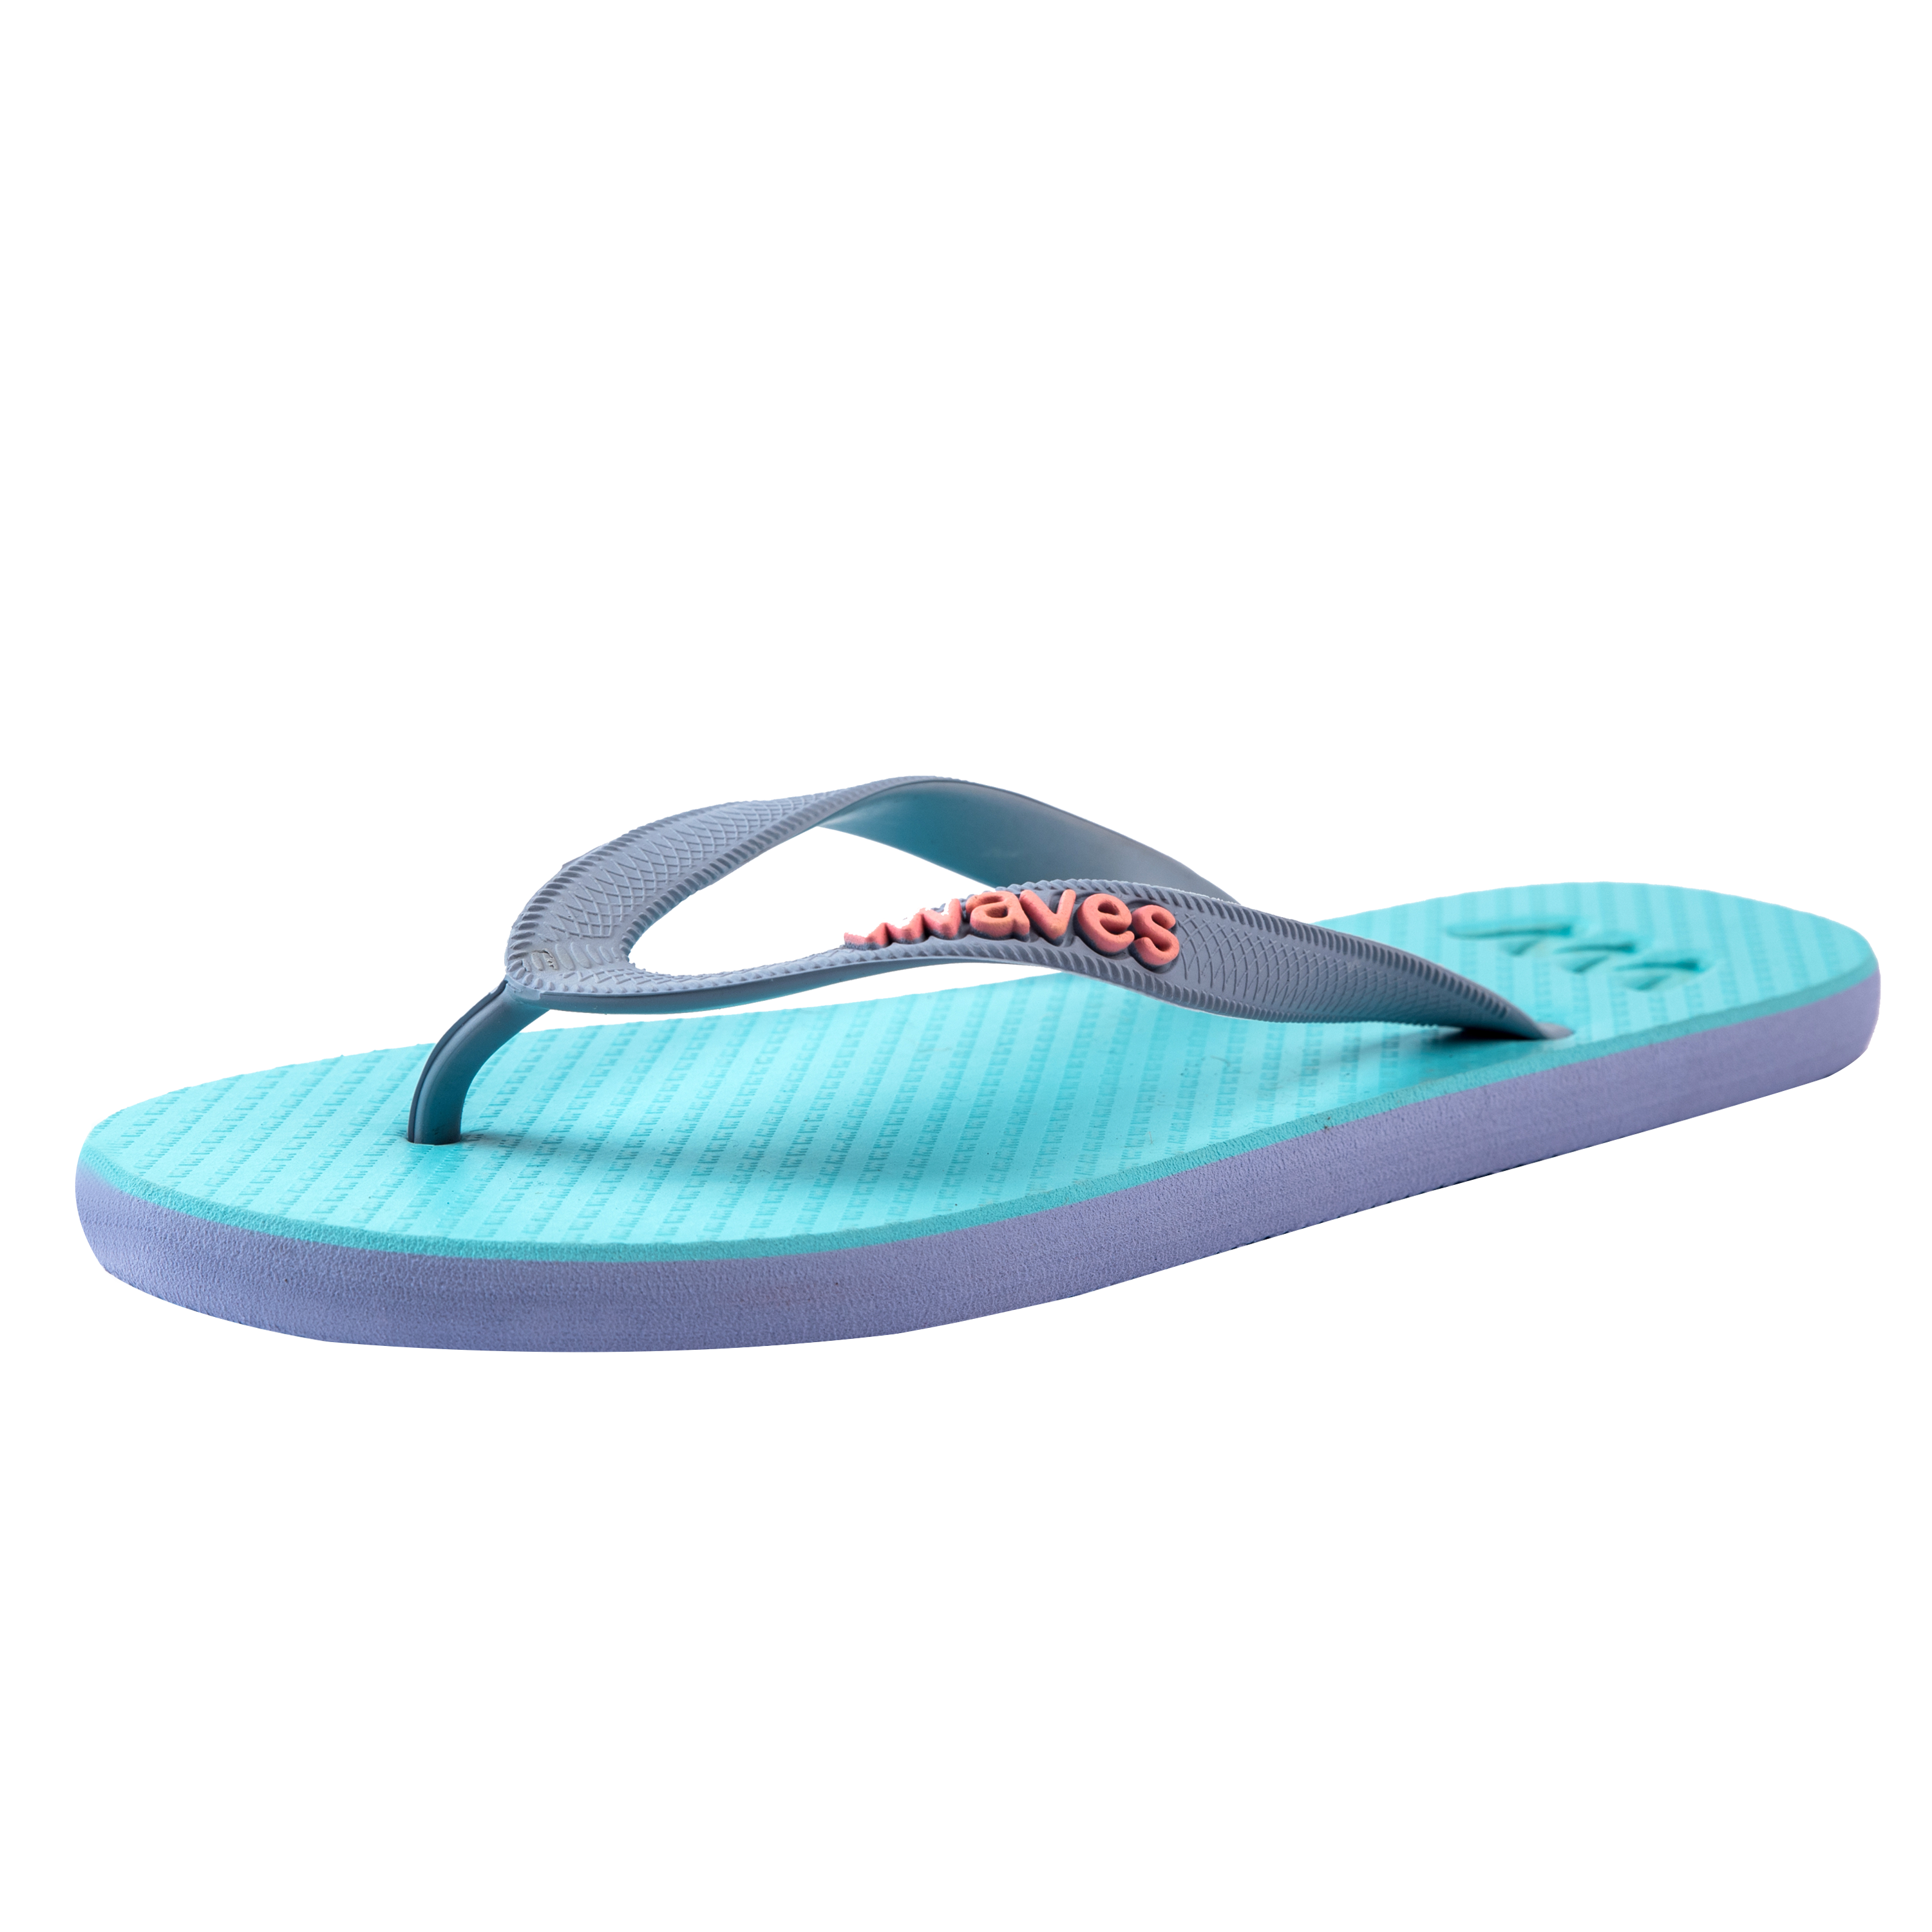 https://www.wavesflipflops.co.uk/wp-content/uploads/2019/07/products-HM0379---Side.png